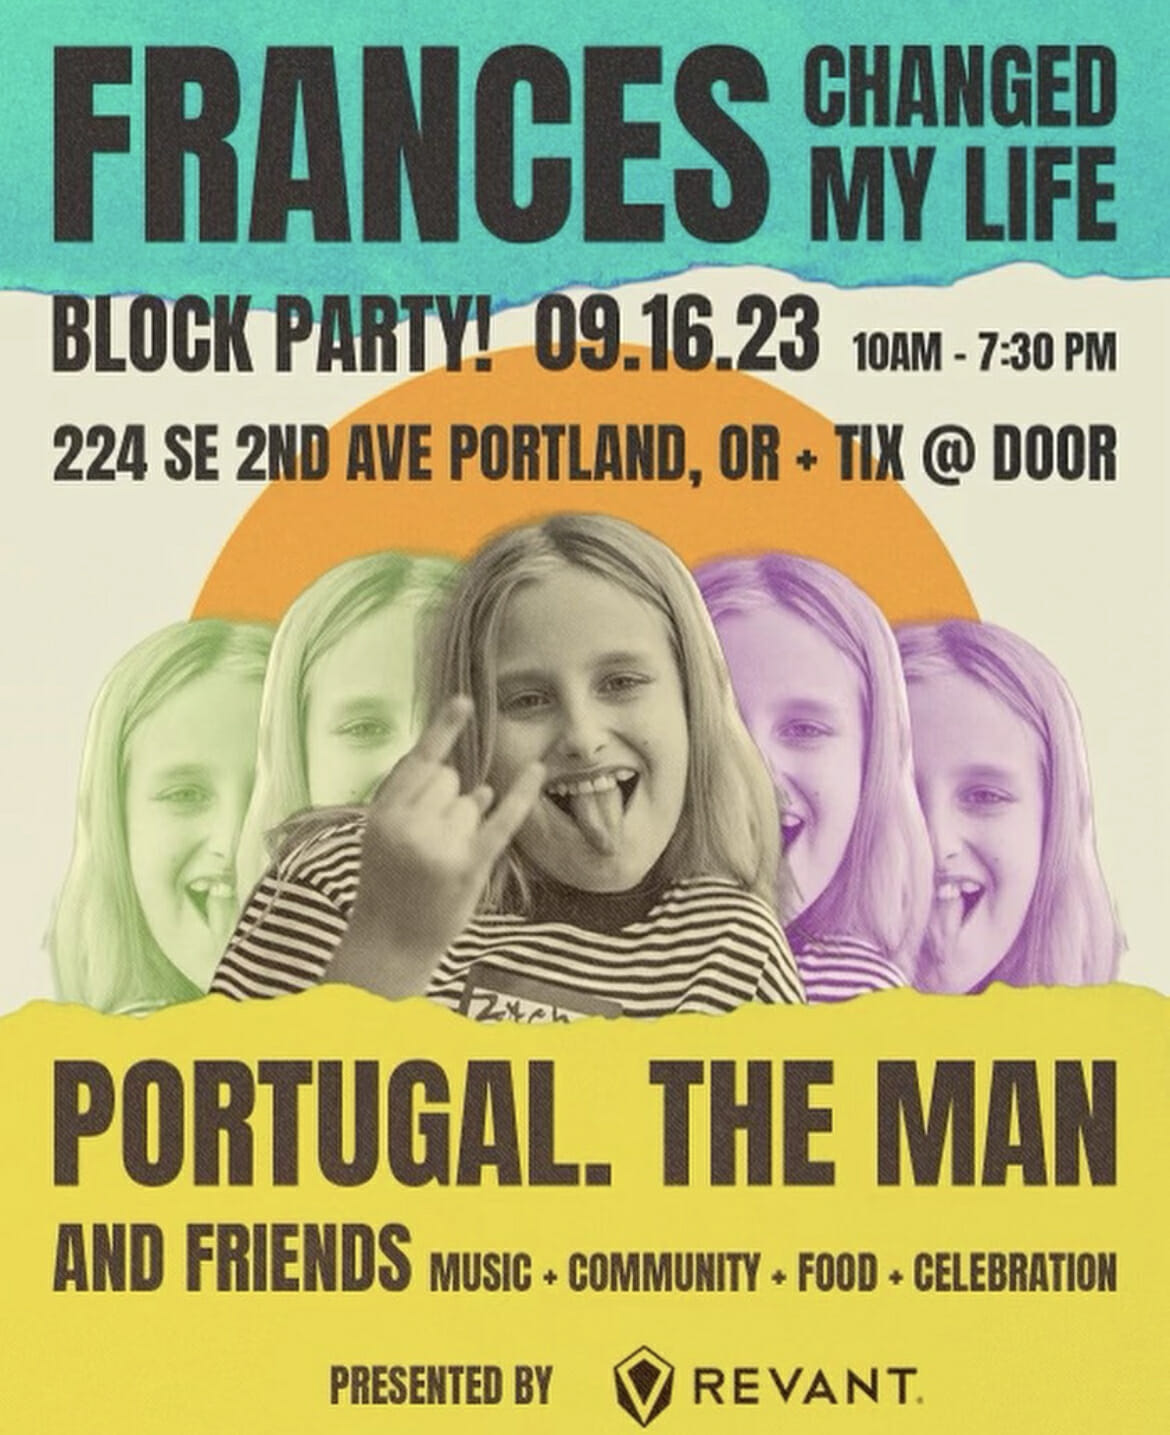 Portugal. The Man Announce Frances Changed My Life Block Party and Hometown Concert in Portland